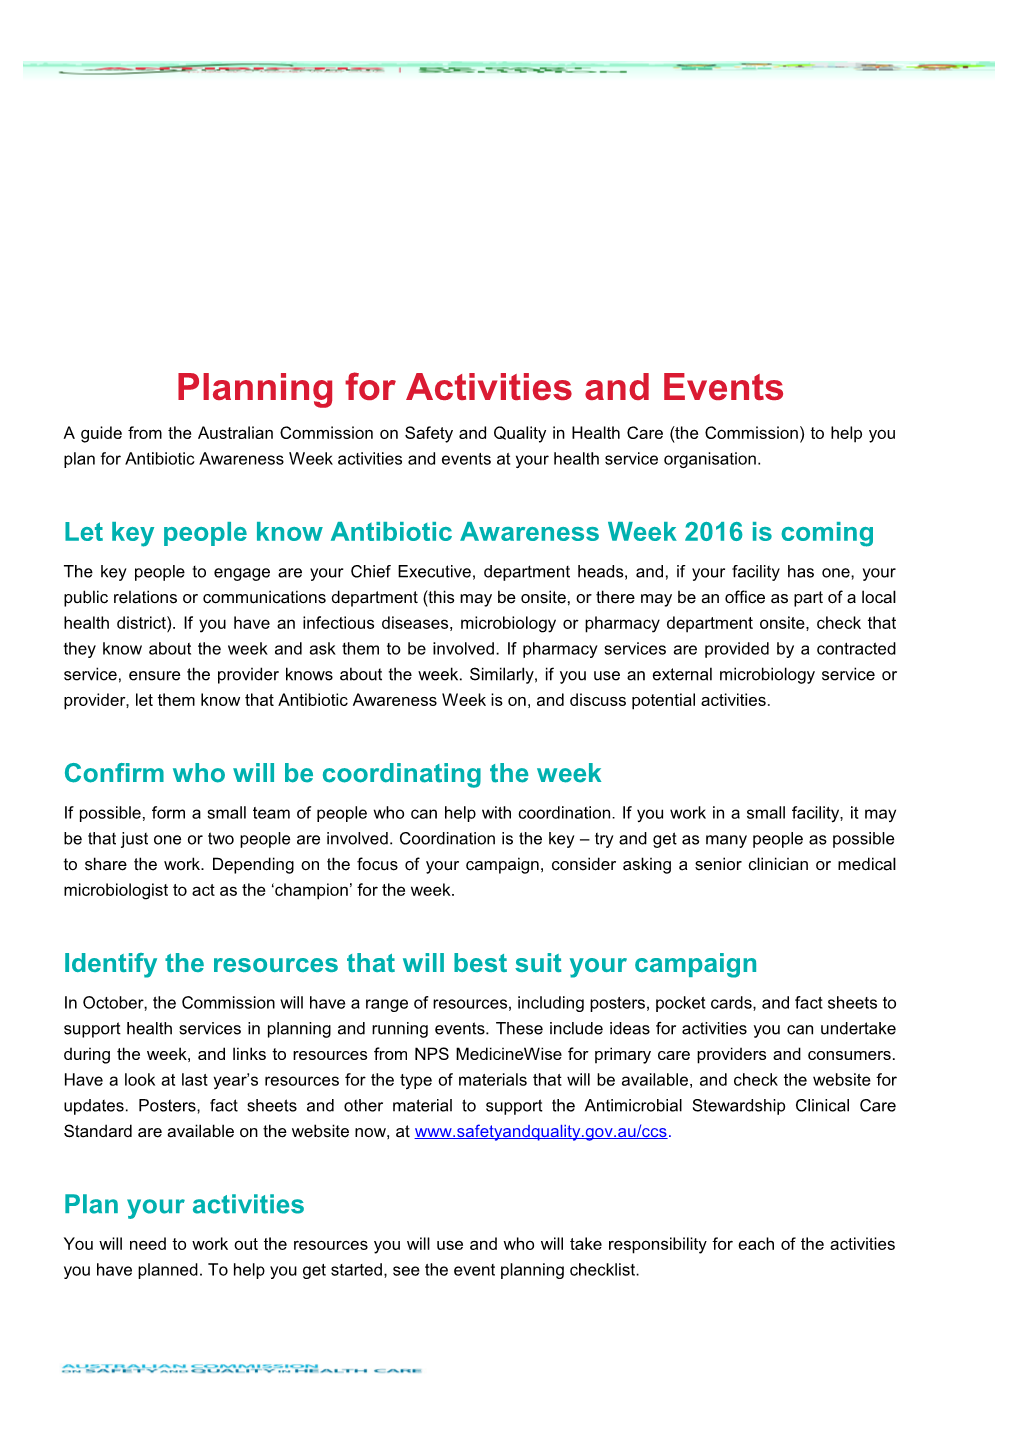 Planning for Activities and Events